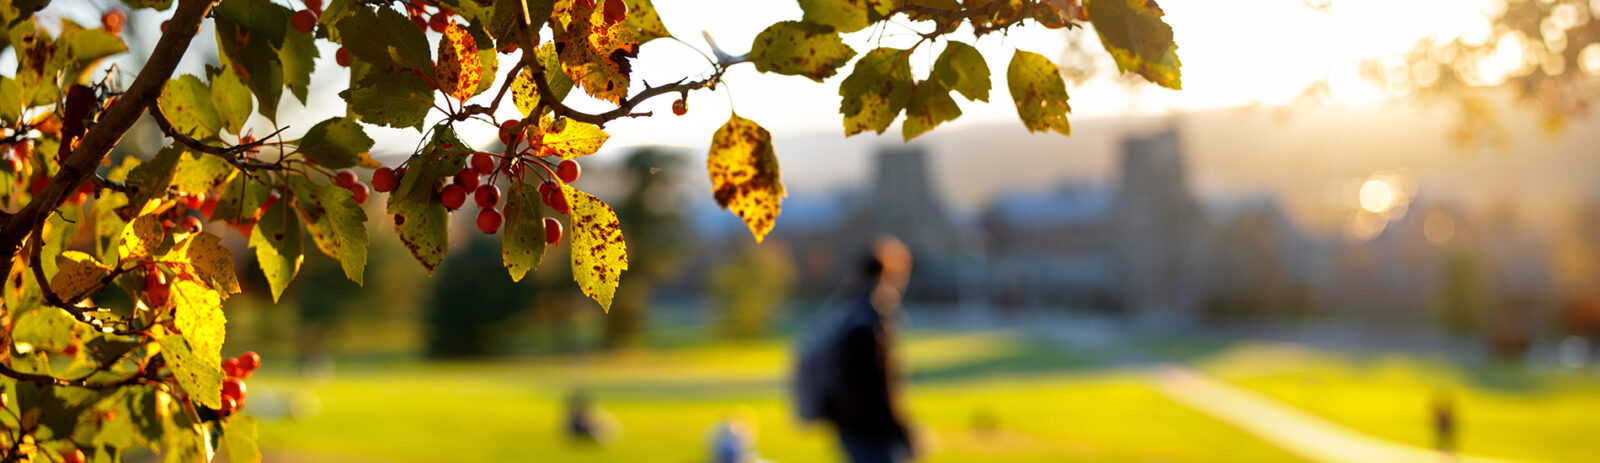 A landscape photo of leafs on a tree with Cornell campus blurry in the background.